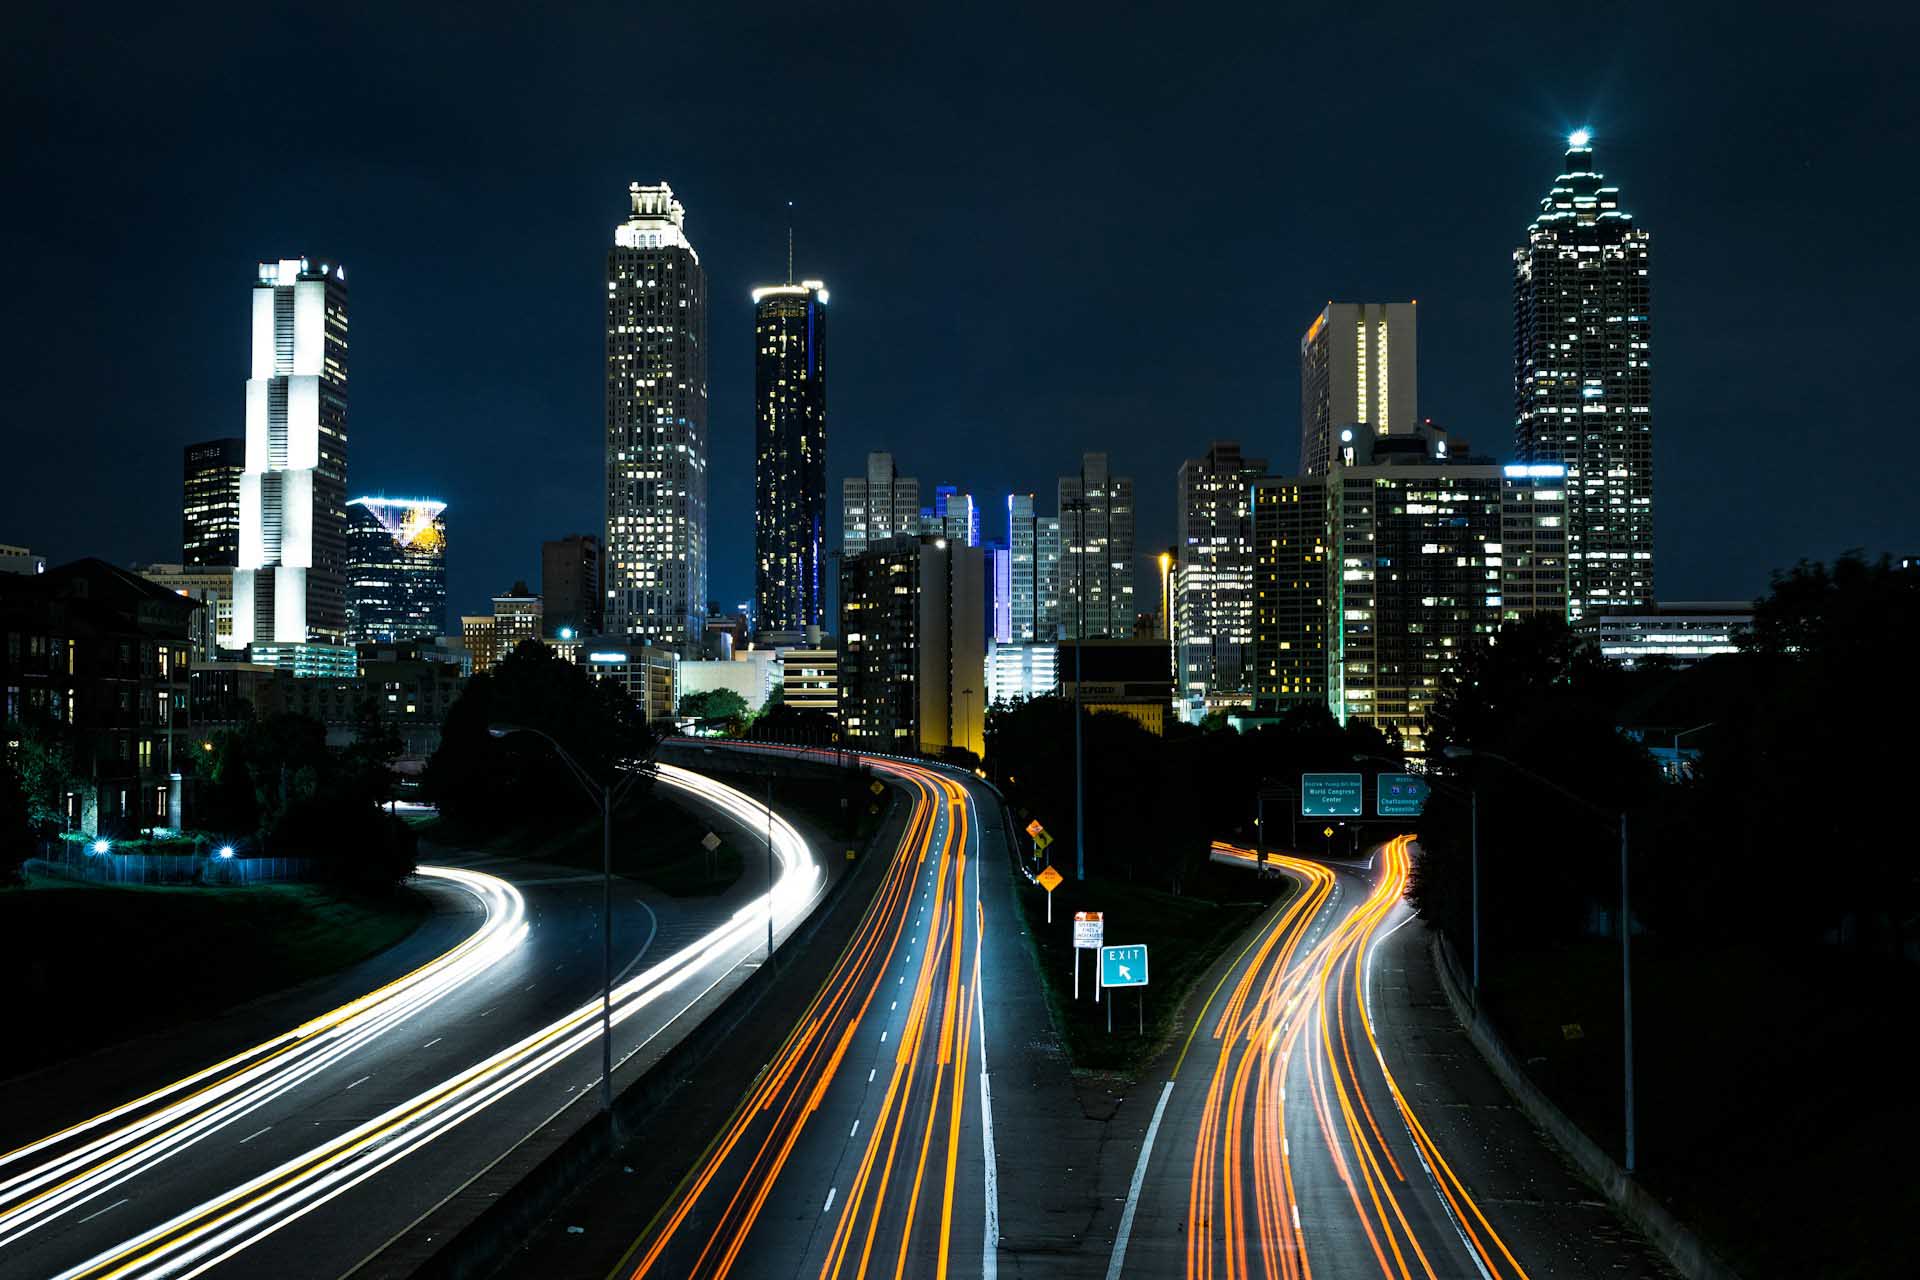 Cityscape at night with busy highways